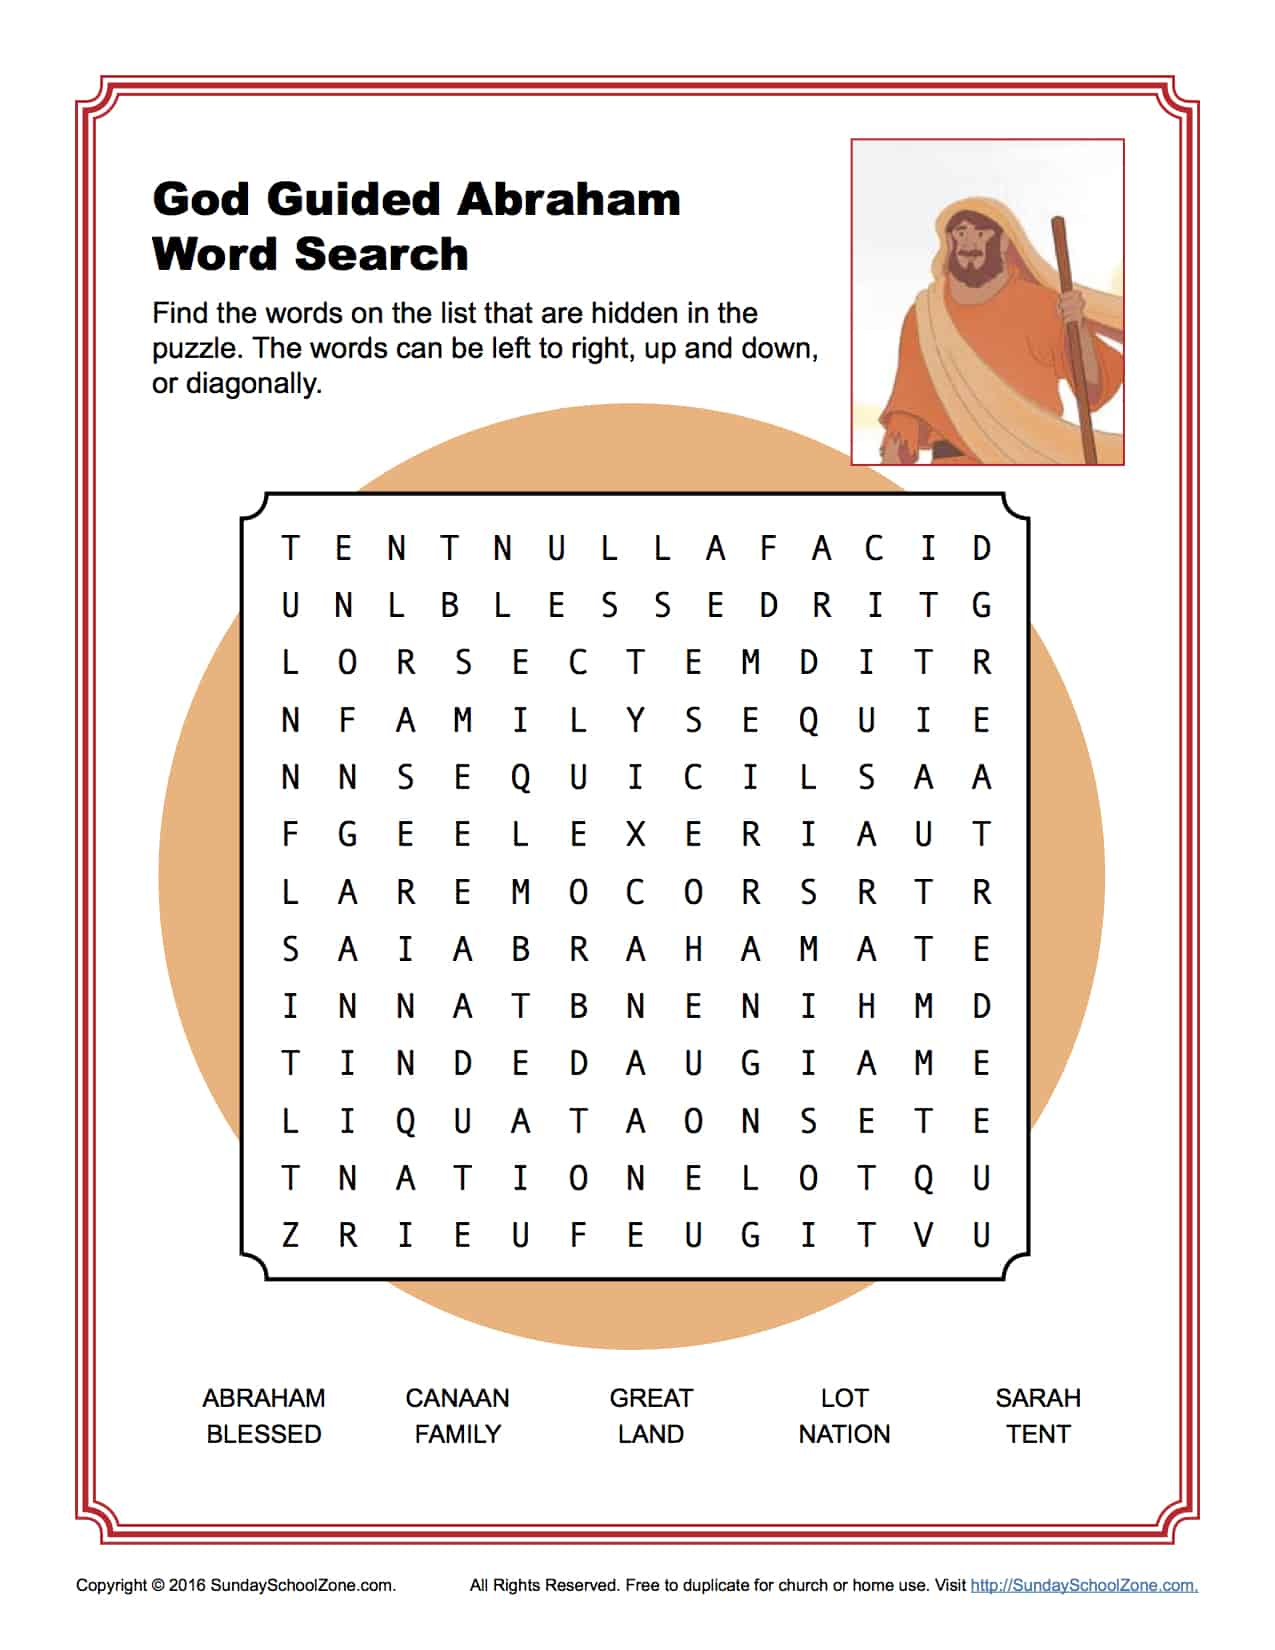 God Guided Abraham Word Search Children 39 s Bible Activities Sunday 